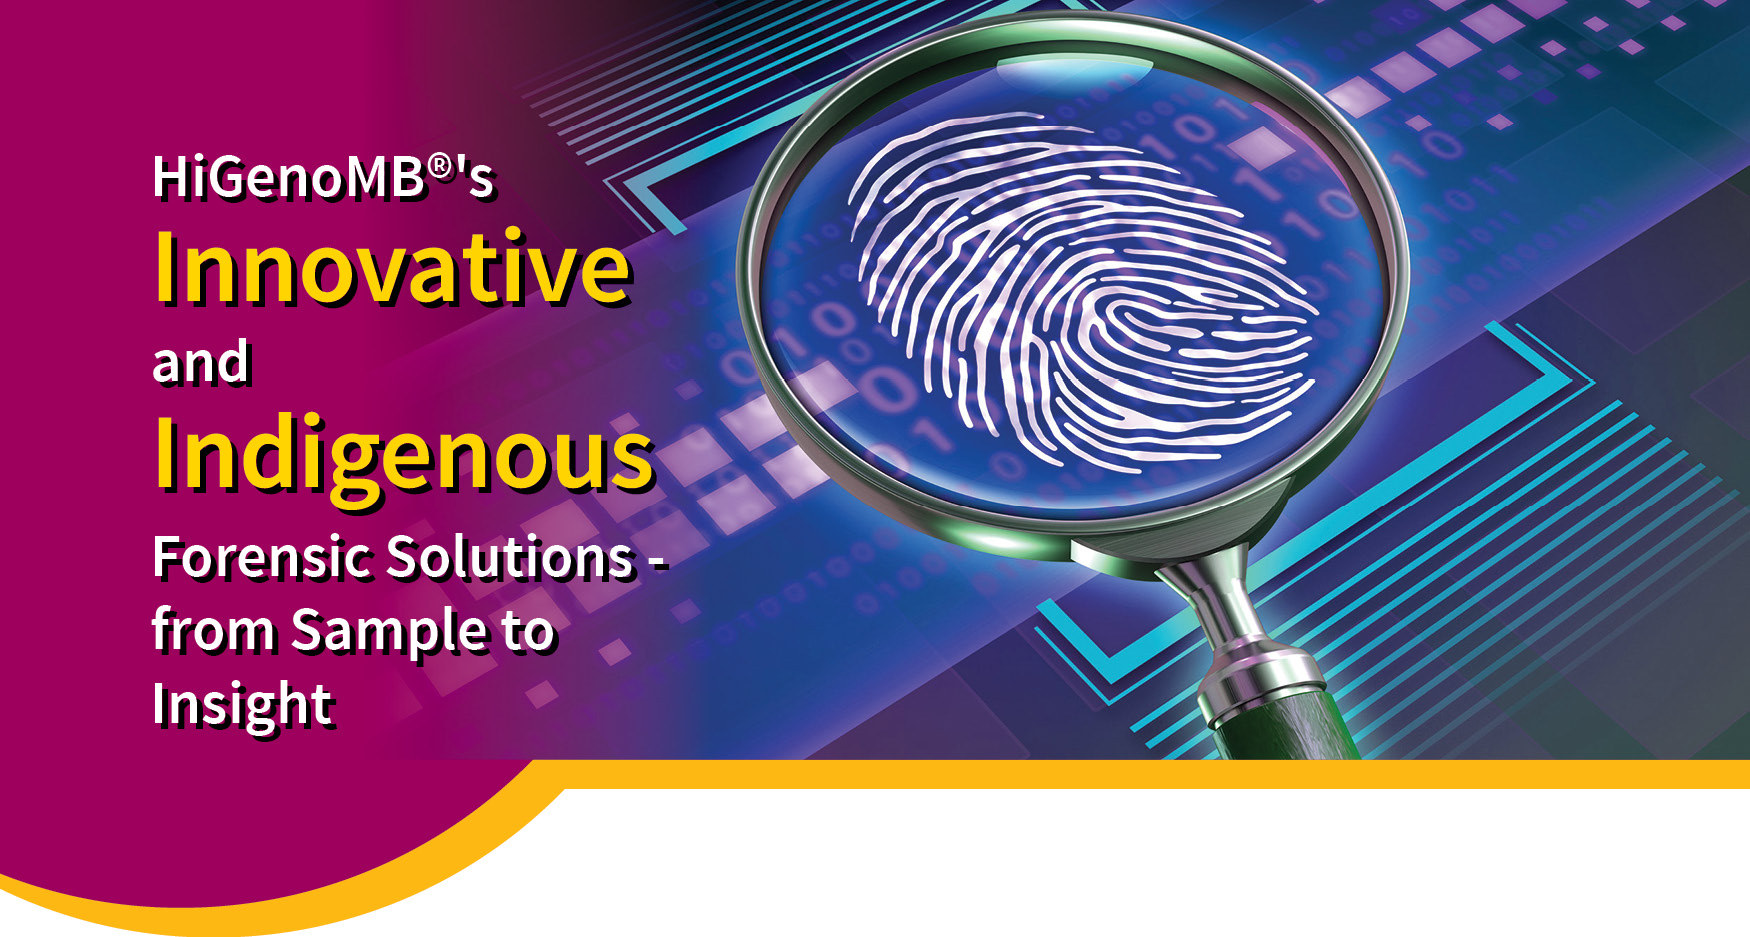 HiGenoMB®'s Innovative and Indigenous Forensic Solutions - from Sample to Insight